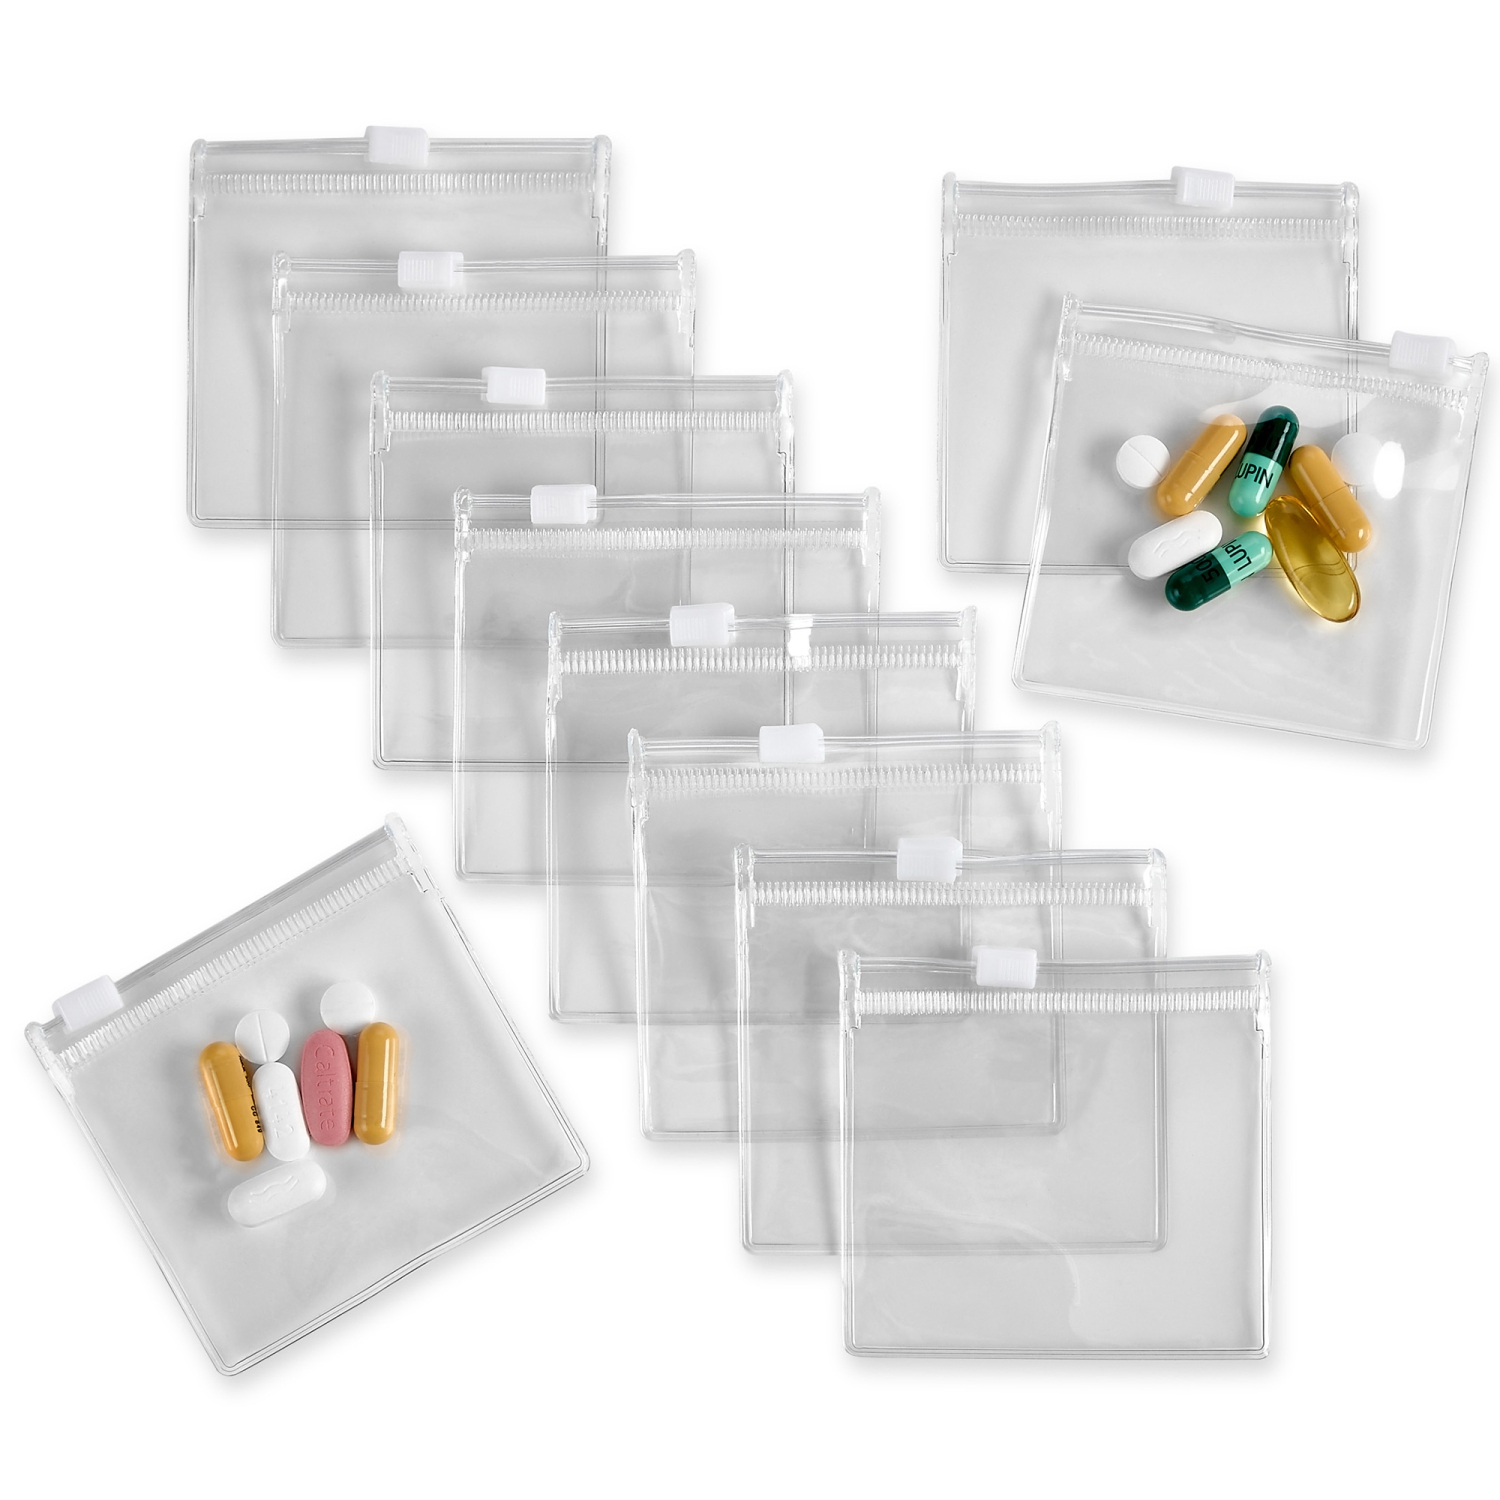 Zippered Pill Pouch Bags - 12 Pcs, Slide Lock Clear Plastic Mini Bags, BPA-Free for Pills Vitamins, Supplements, Medications, Jewelry, Crafts, Small Objects - Self-Sealing